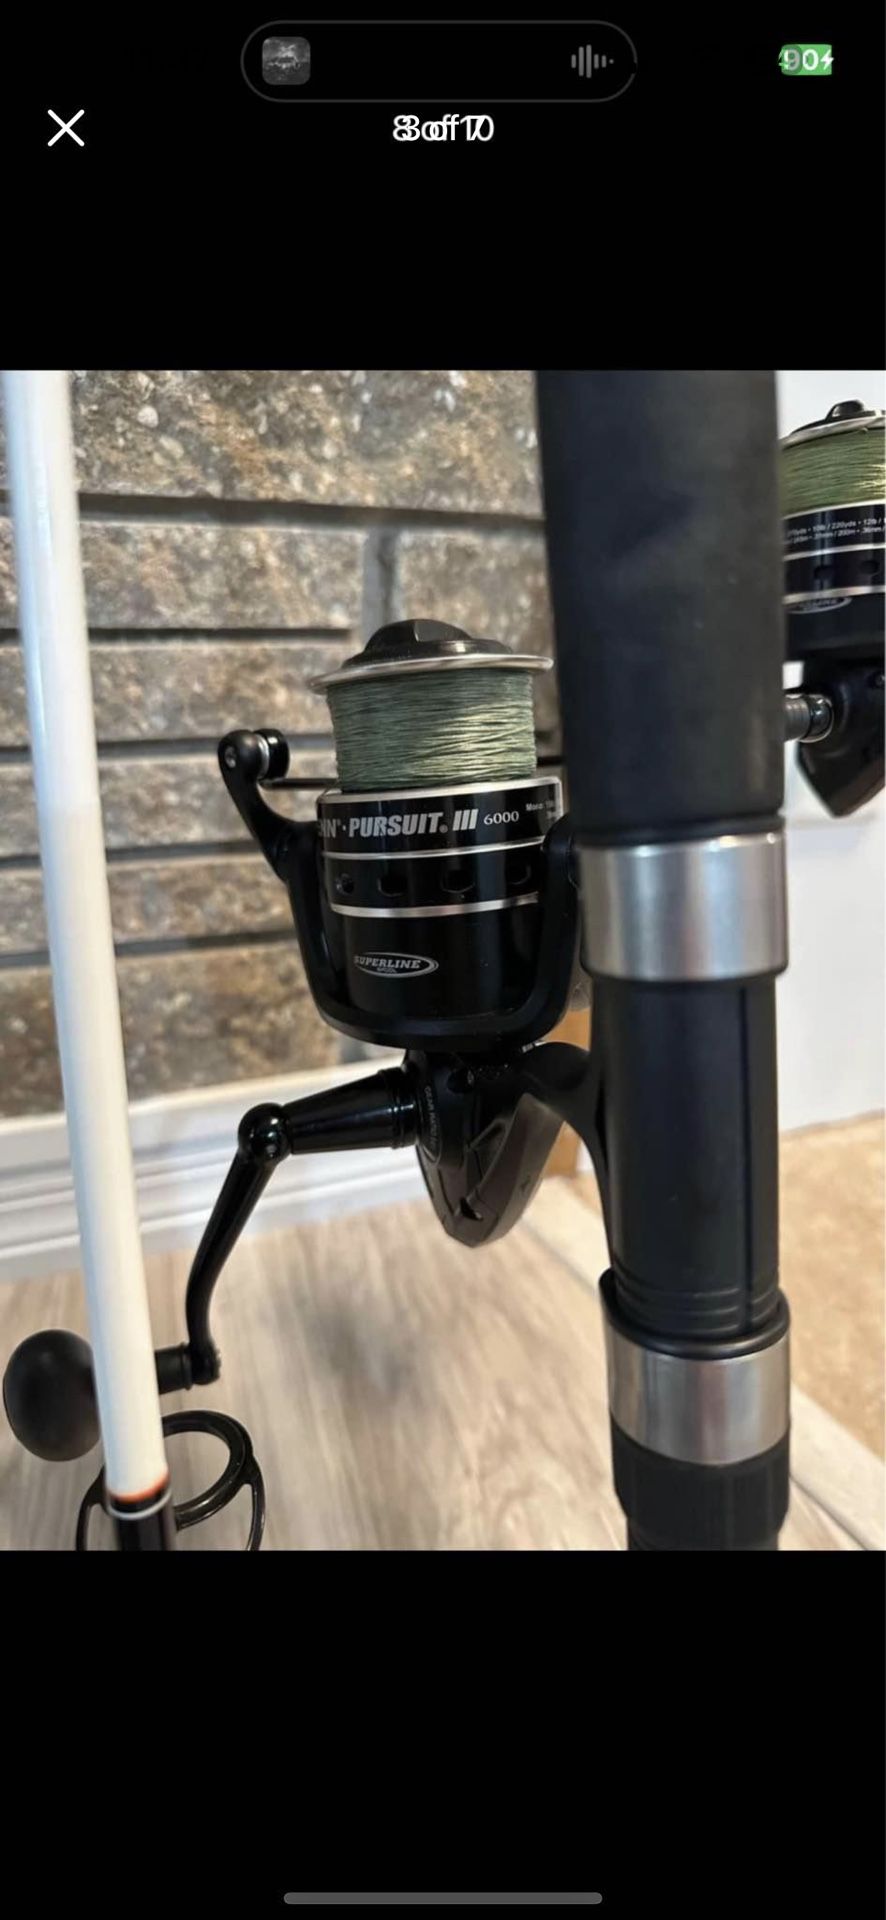 10ft ugly Stik Penn pursuit iv 6000 mono $140 8ft Berkley Penn pursuit 4  6000 braid $140 8ft ugly Stik Penn pursuit 3 4000 braid $140 rods are brand  n for Sale in Orlando, FL - OfferUp